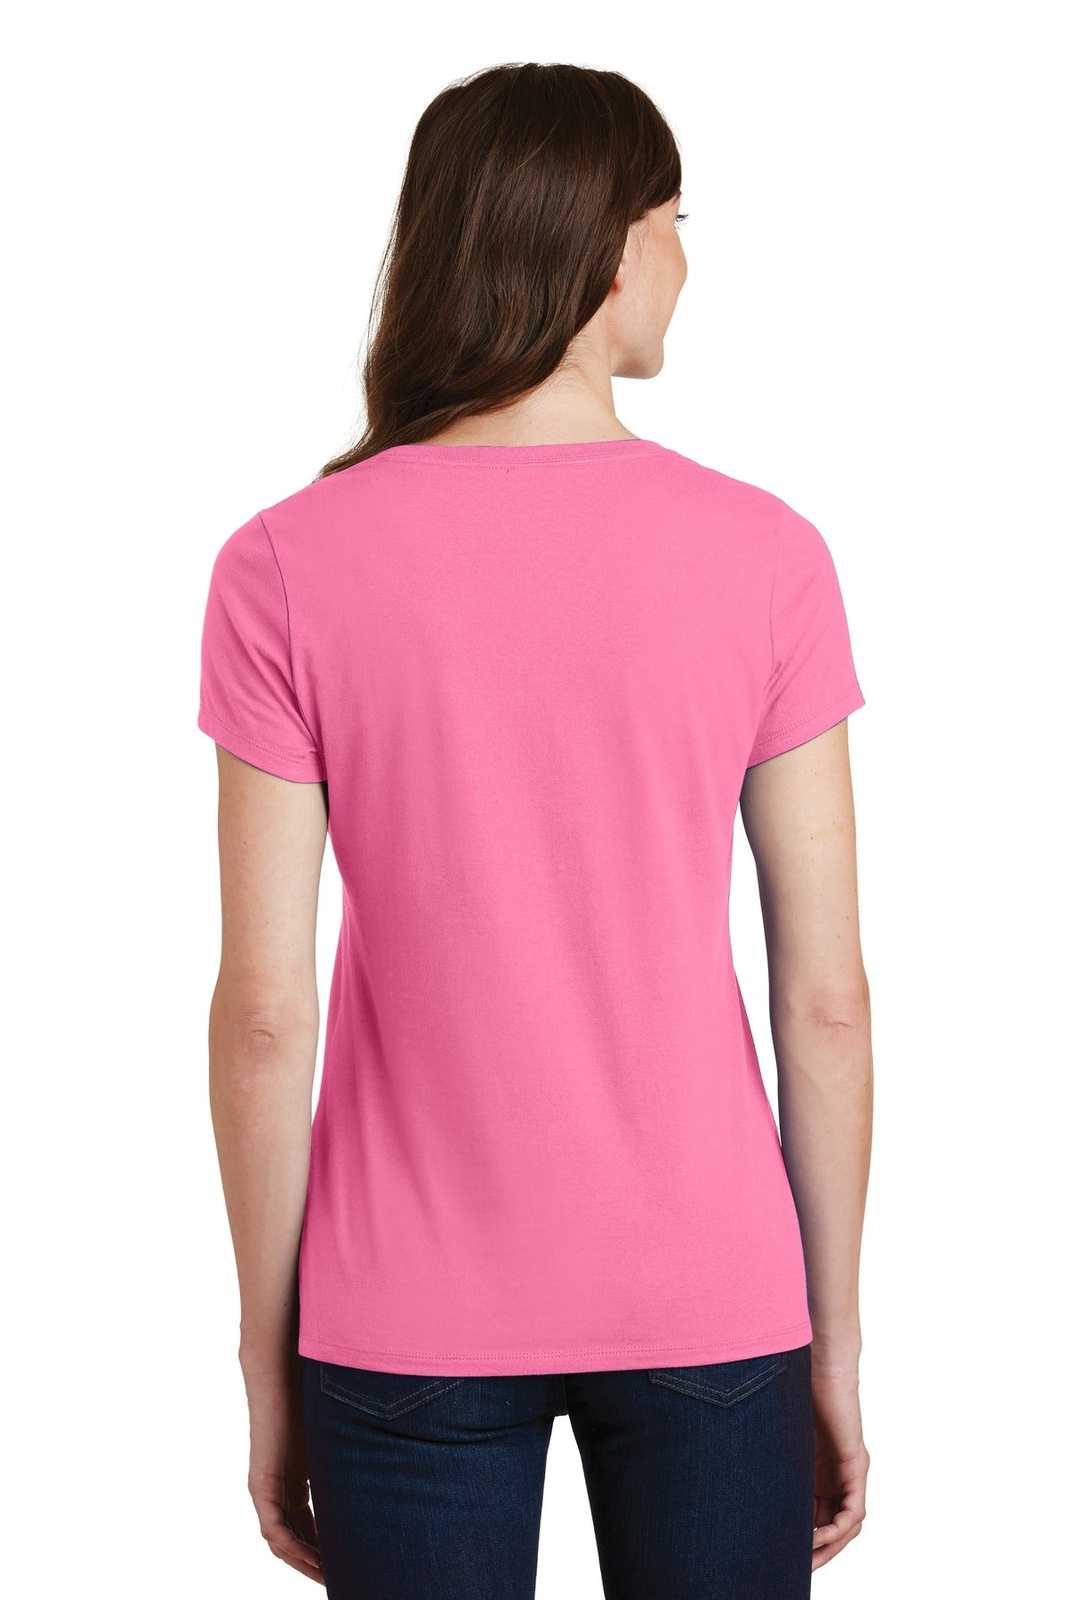 Port & Company LPC450V Ladies Fan Favorite V-Neck Tee - New Pink - HIT a Double - 1